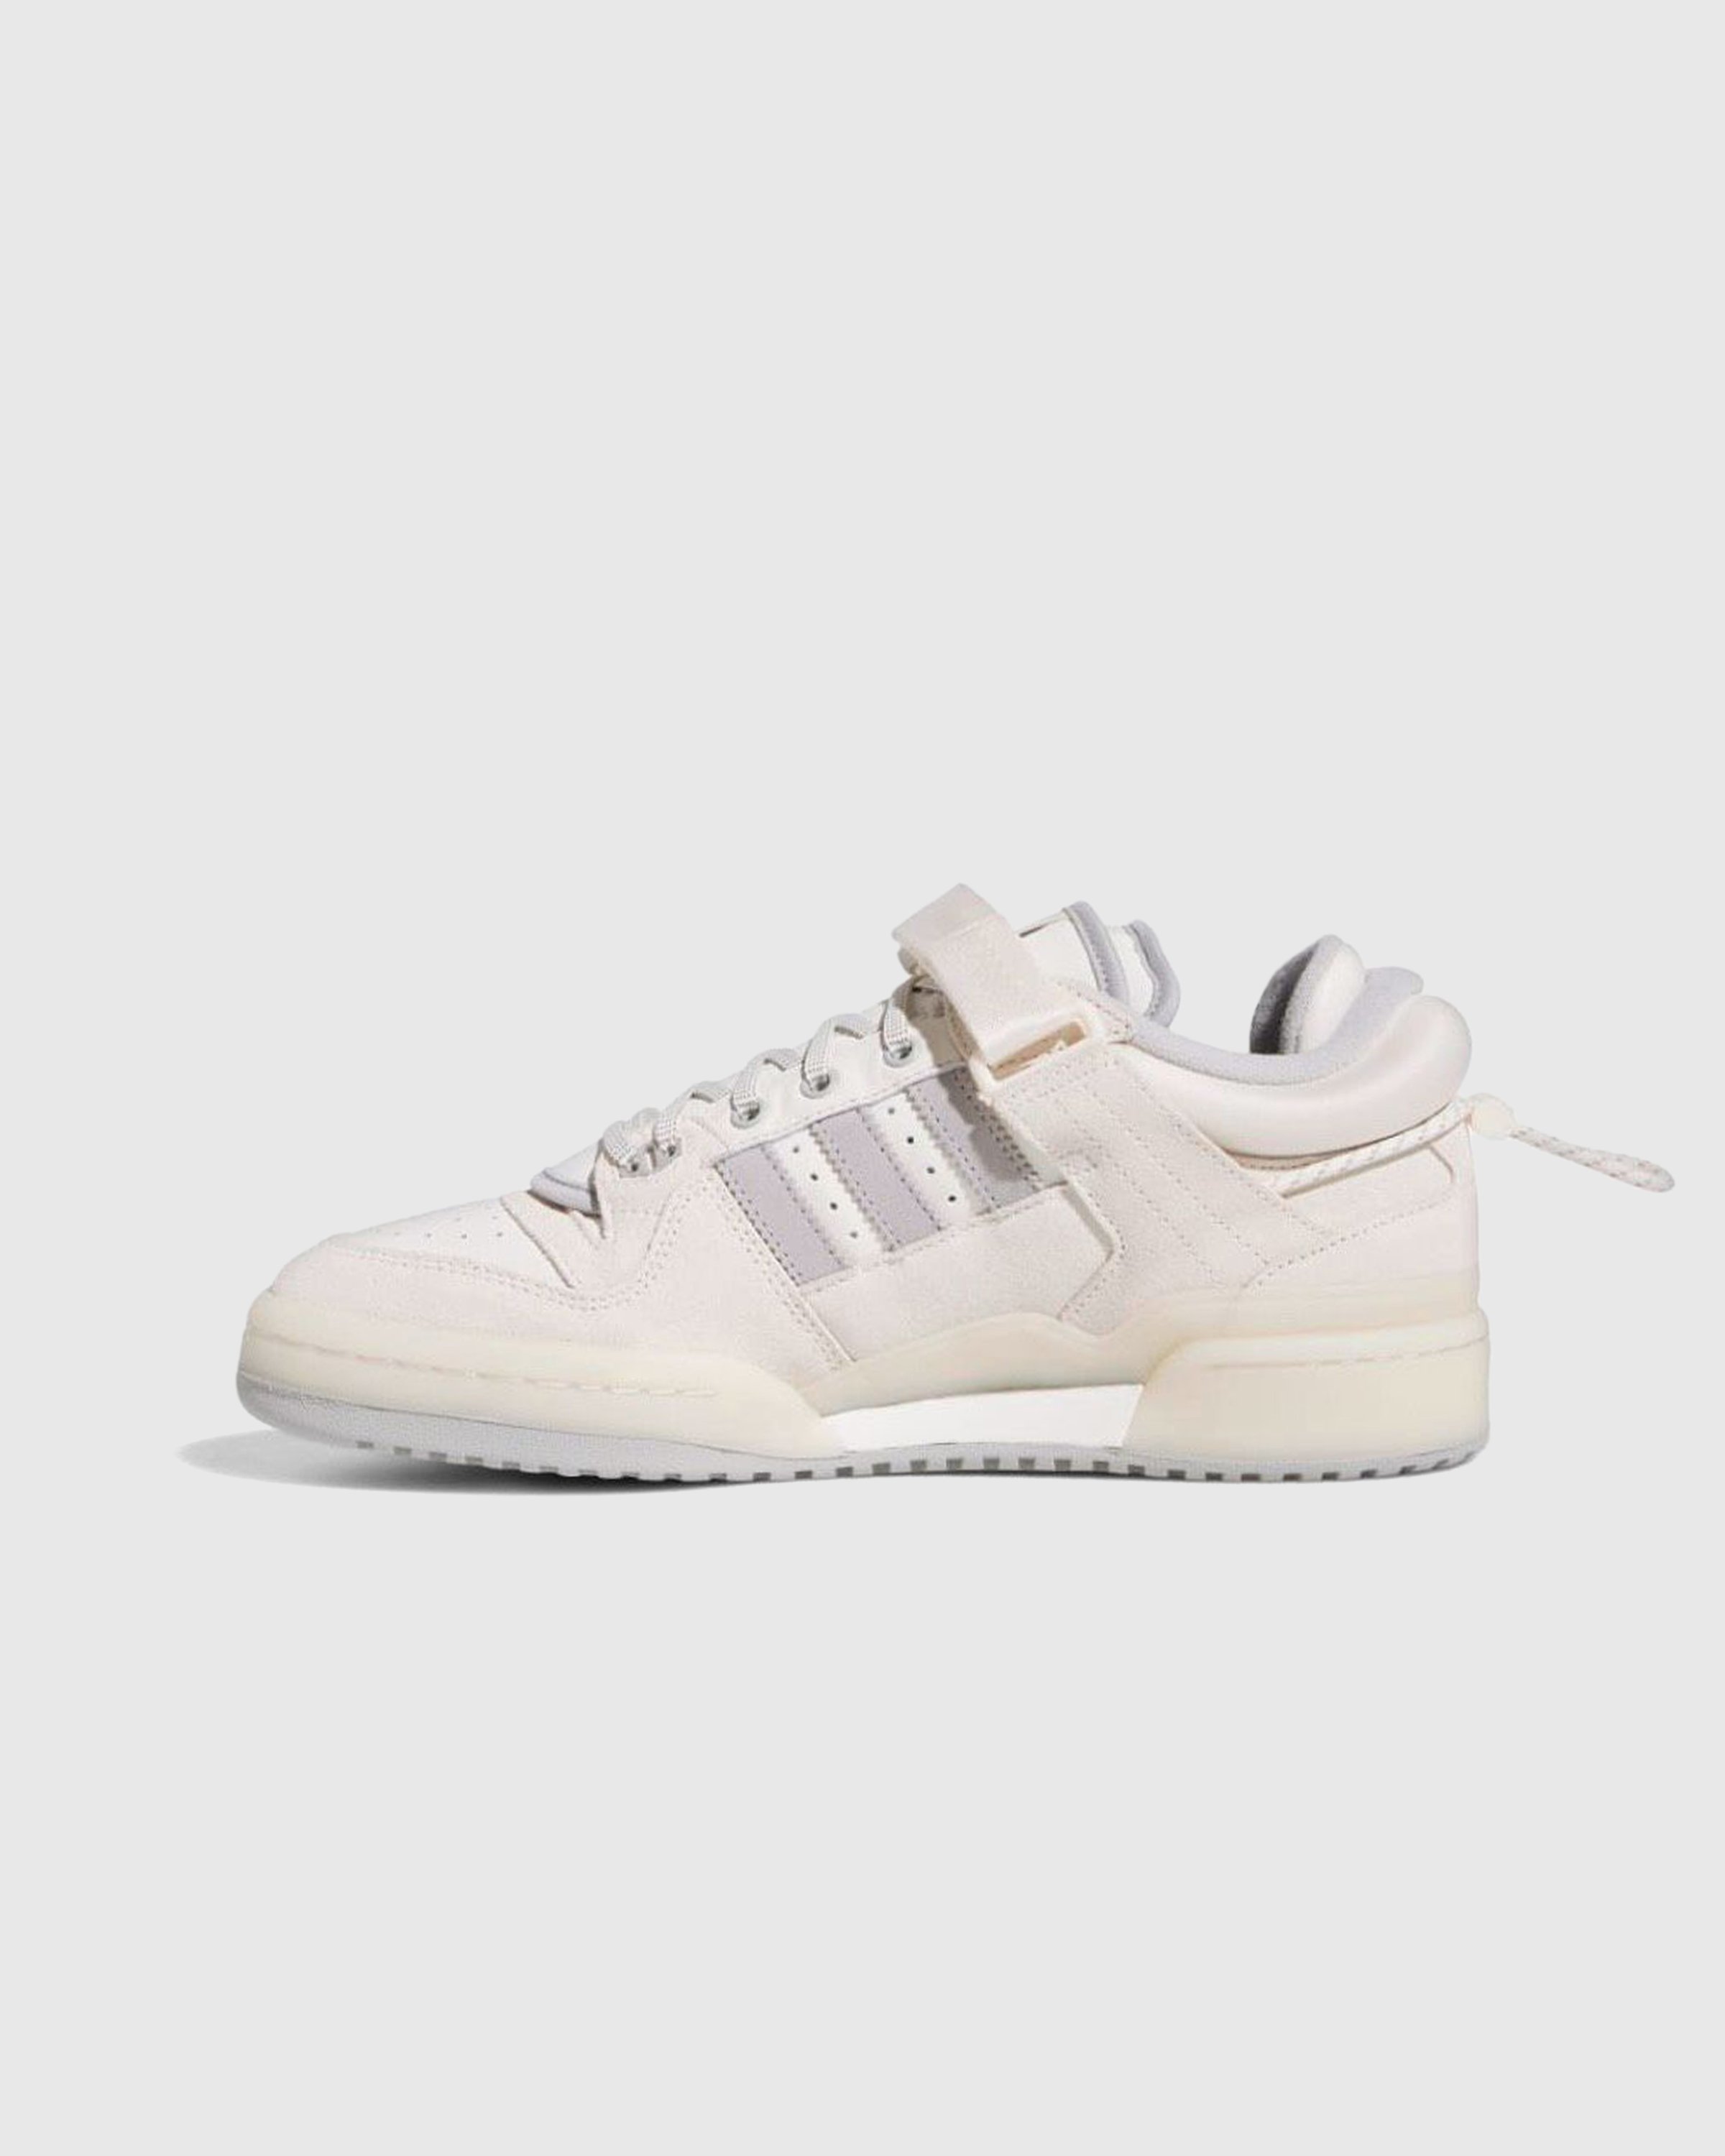 Adidas x Bad Bunny - Forum Low Cloud White/Clear Onix/Chalk White - Footwear - White - Image 2